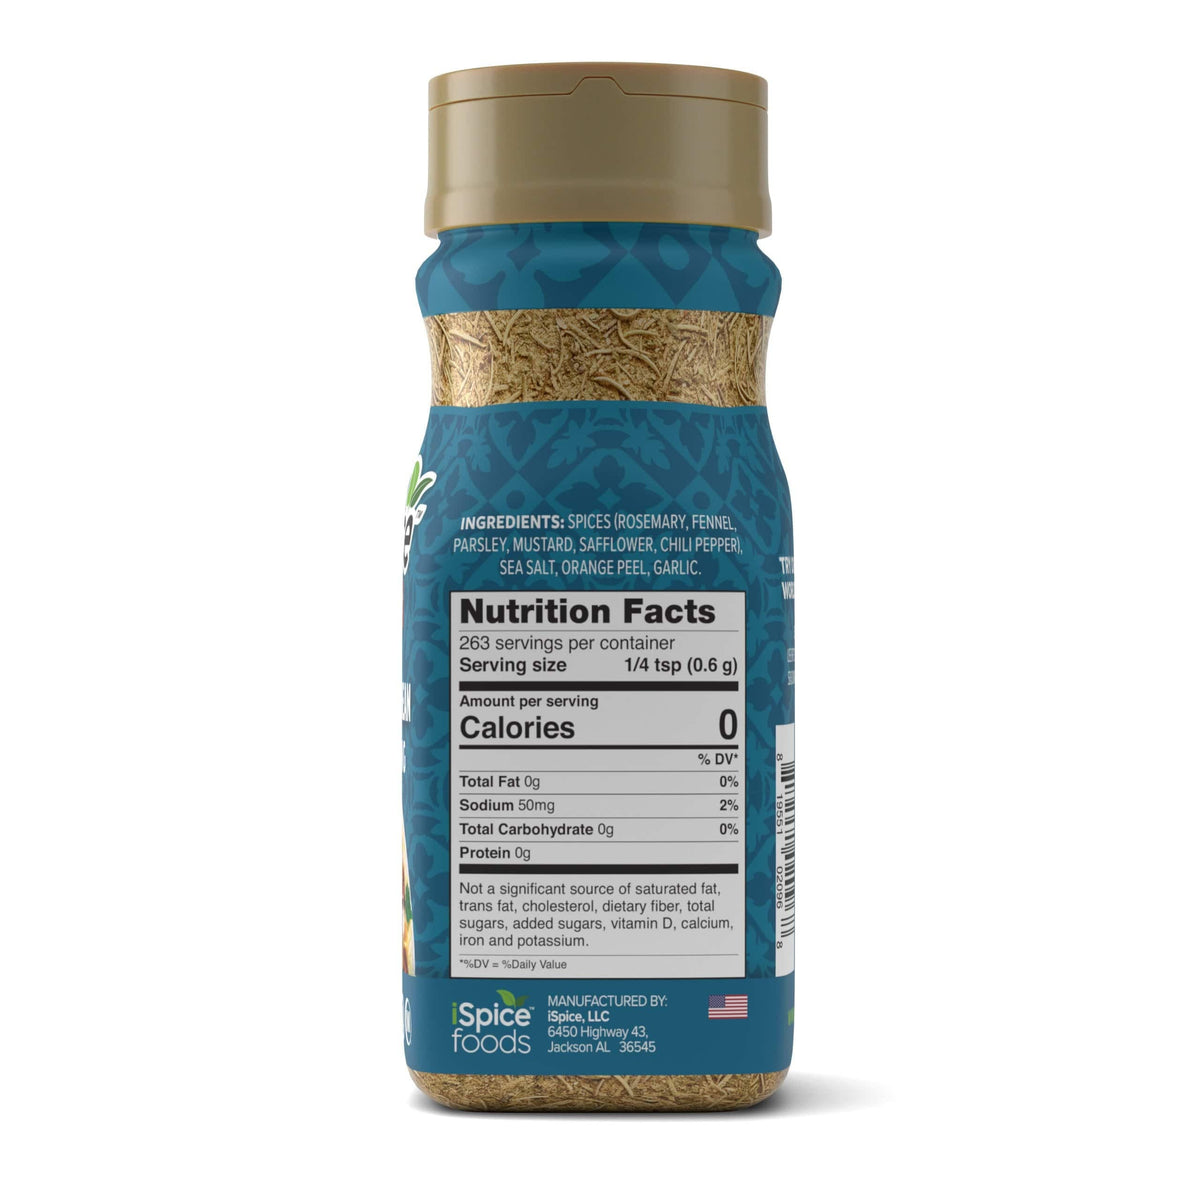 Create delicious, flavorful dishes with this easy-to-use Mediterranean Seasoning! Perfect for fish, chicken, and vegetables.